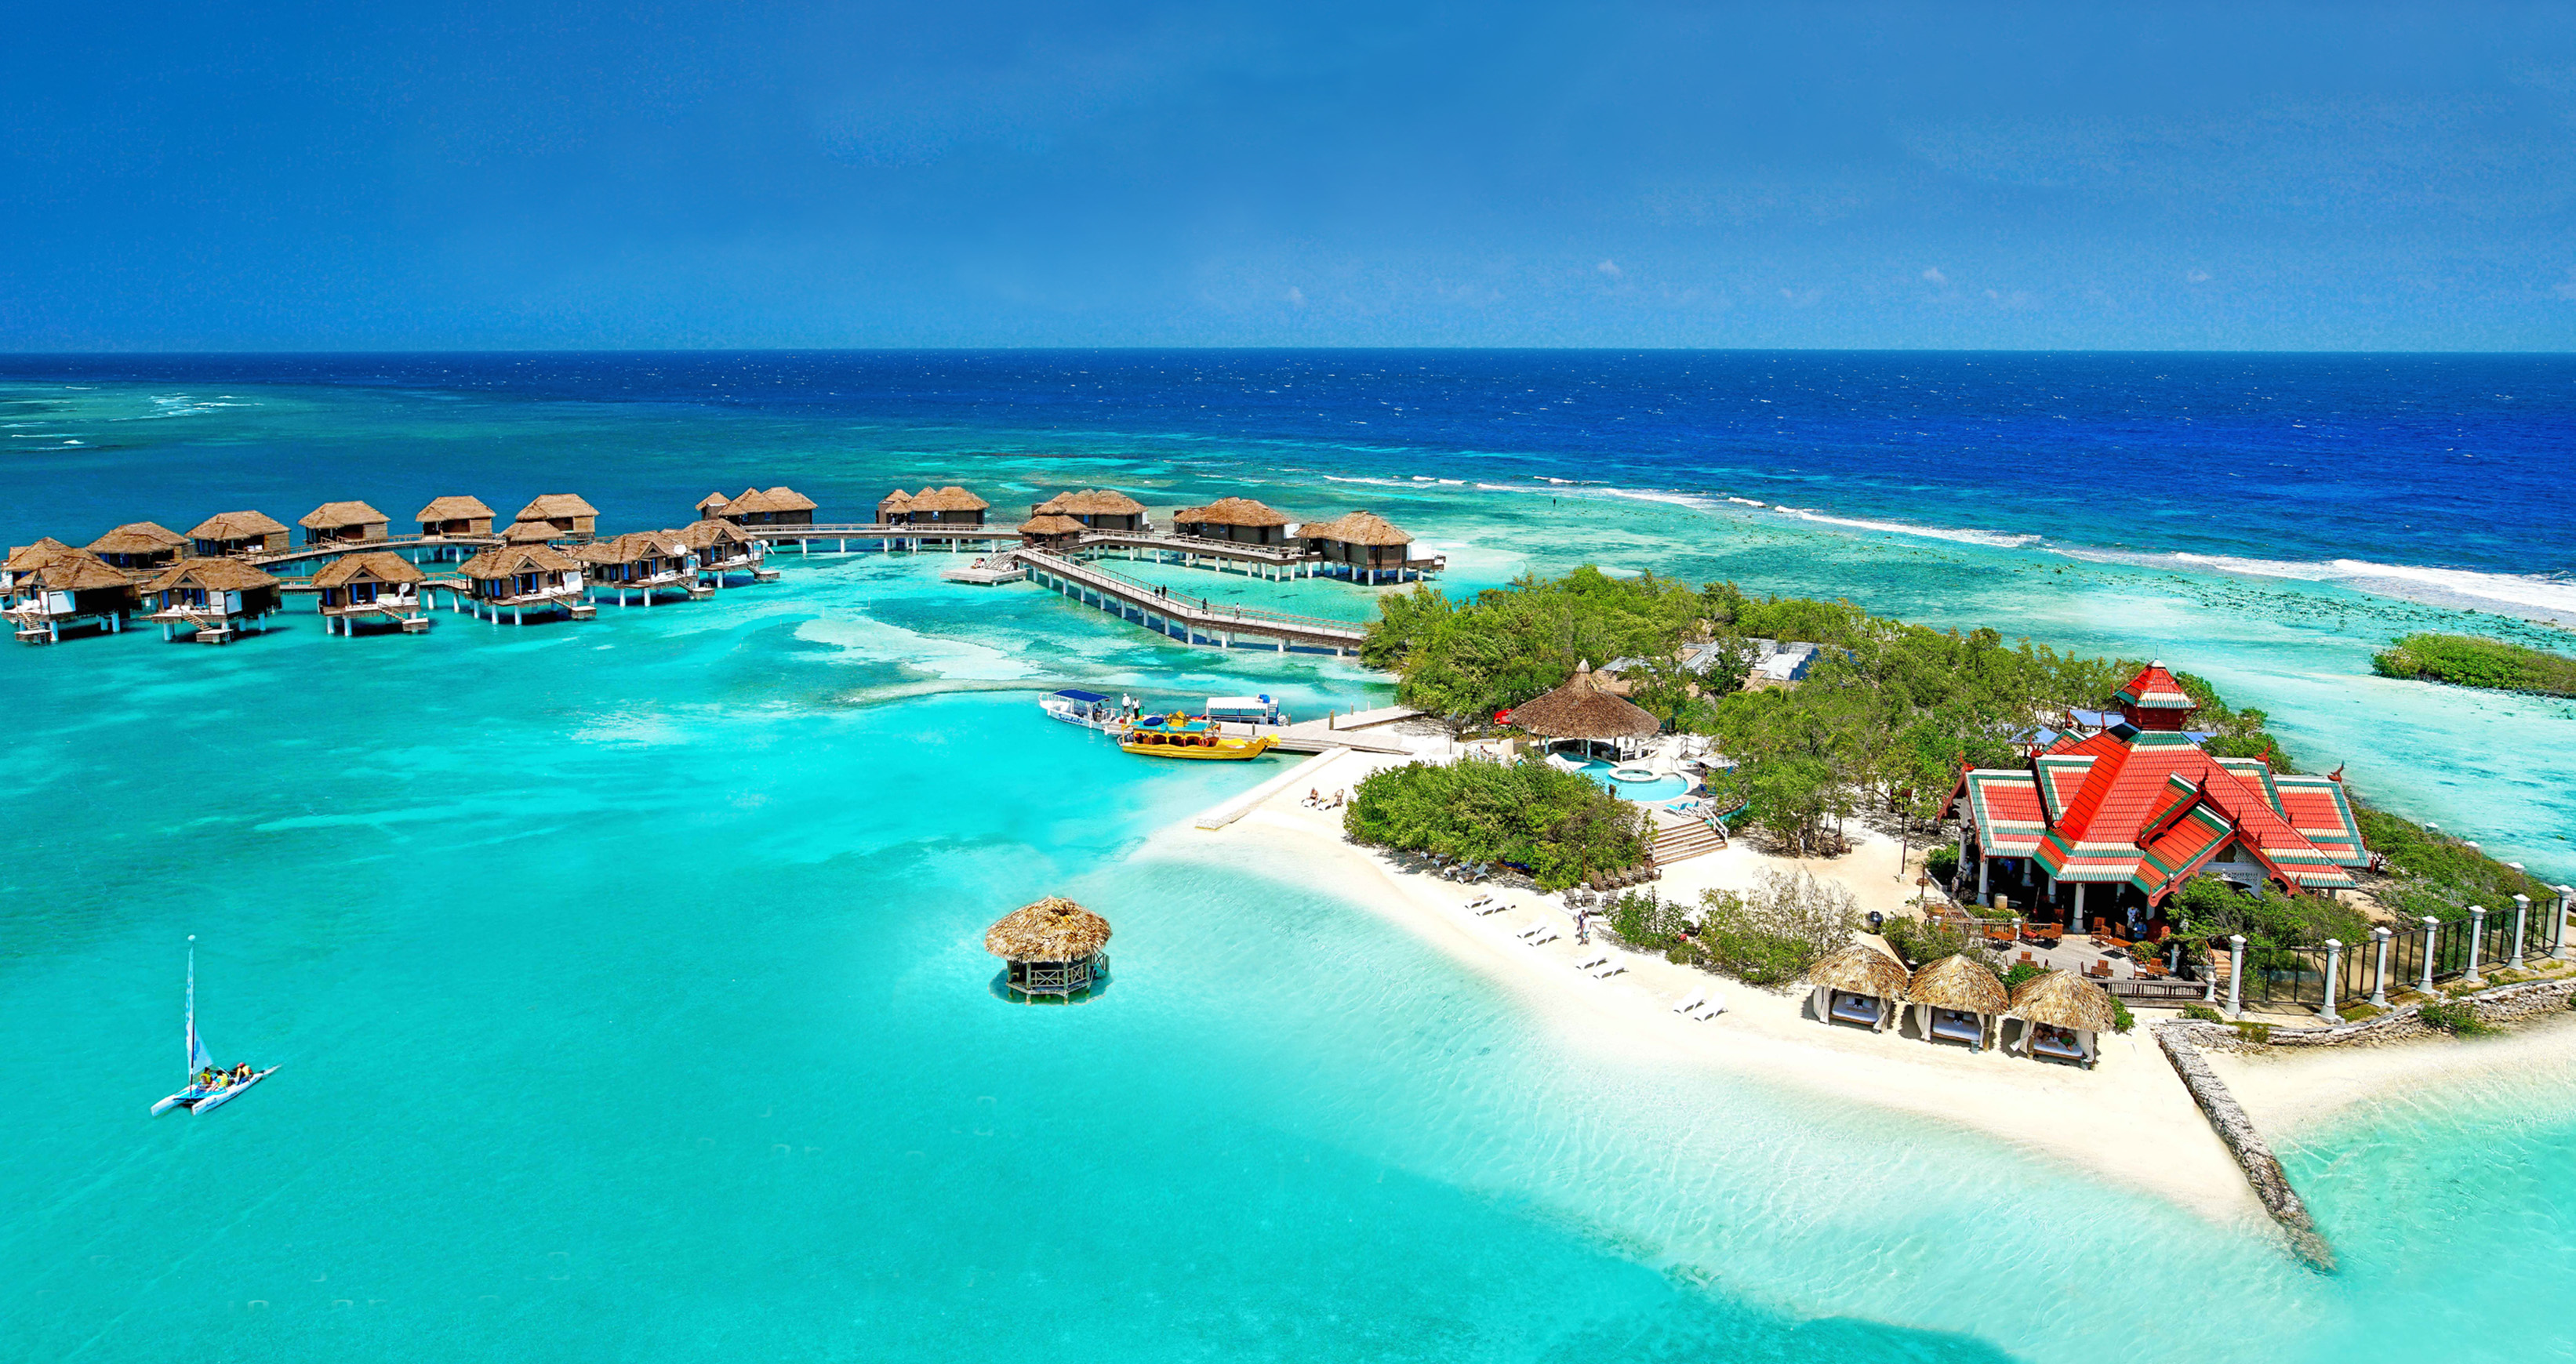 Sandals Royal Caribbean  Sandals Royal Caribbeans overwaterbungalows  are the definition of luxury Did you know you can see the turquoise waters  beneath your feet from inside Spectacular views from every angle